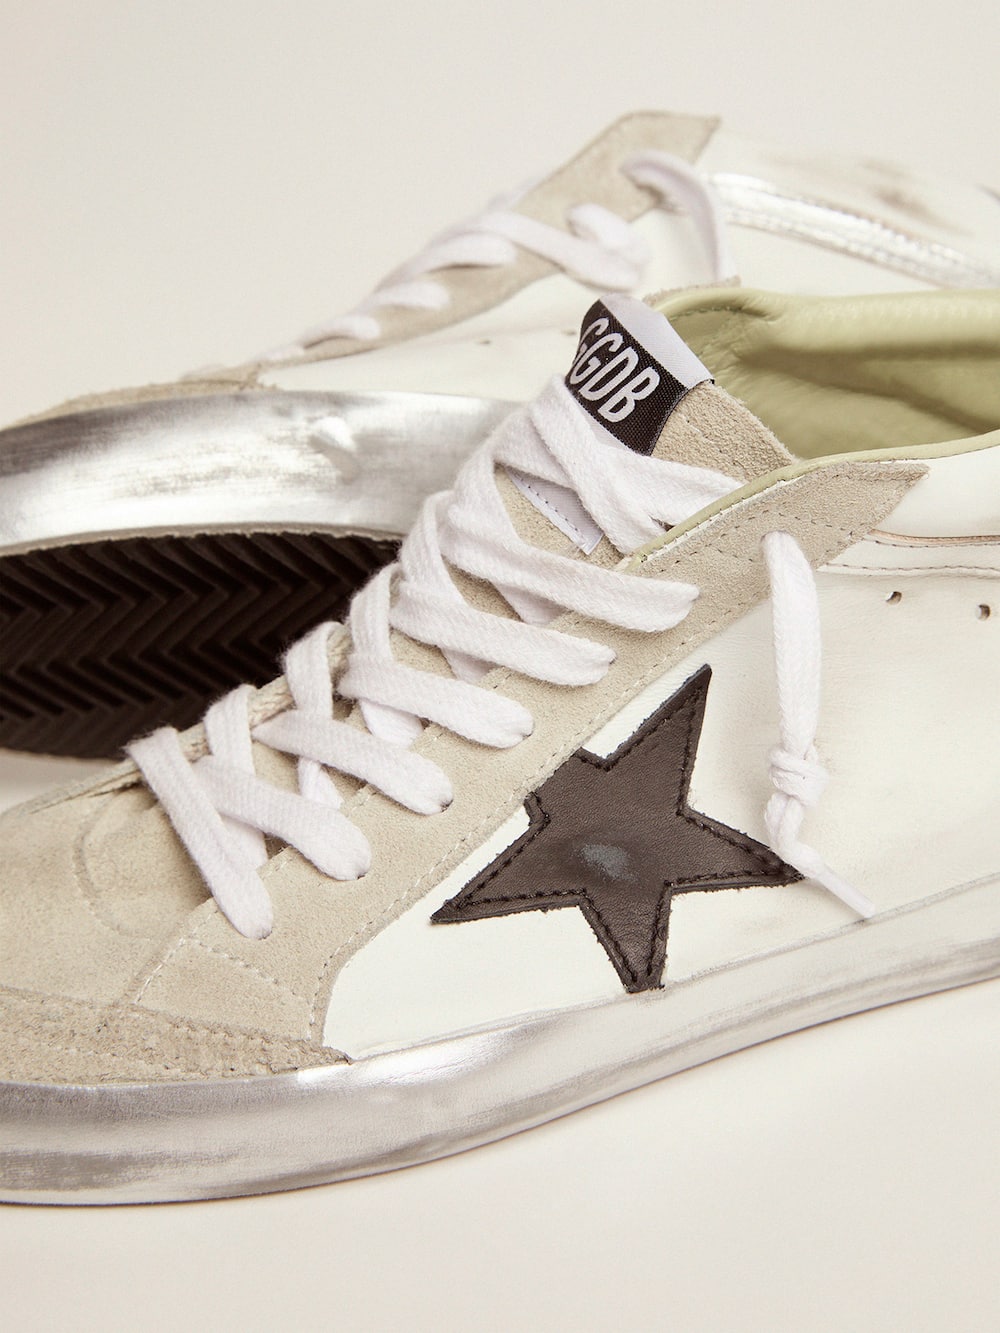 Golden Goose - Mid Star LTD sneakers with glitter heel tab and handwritten lettering on the foxing in 